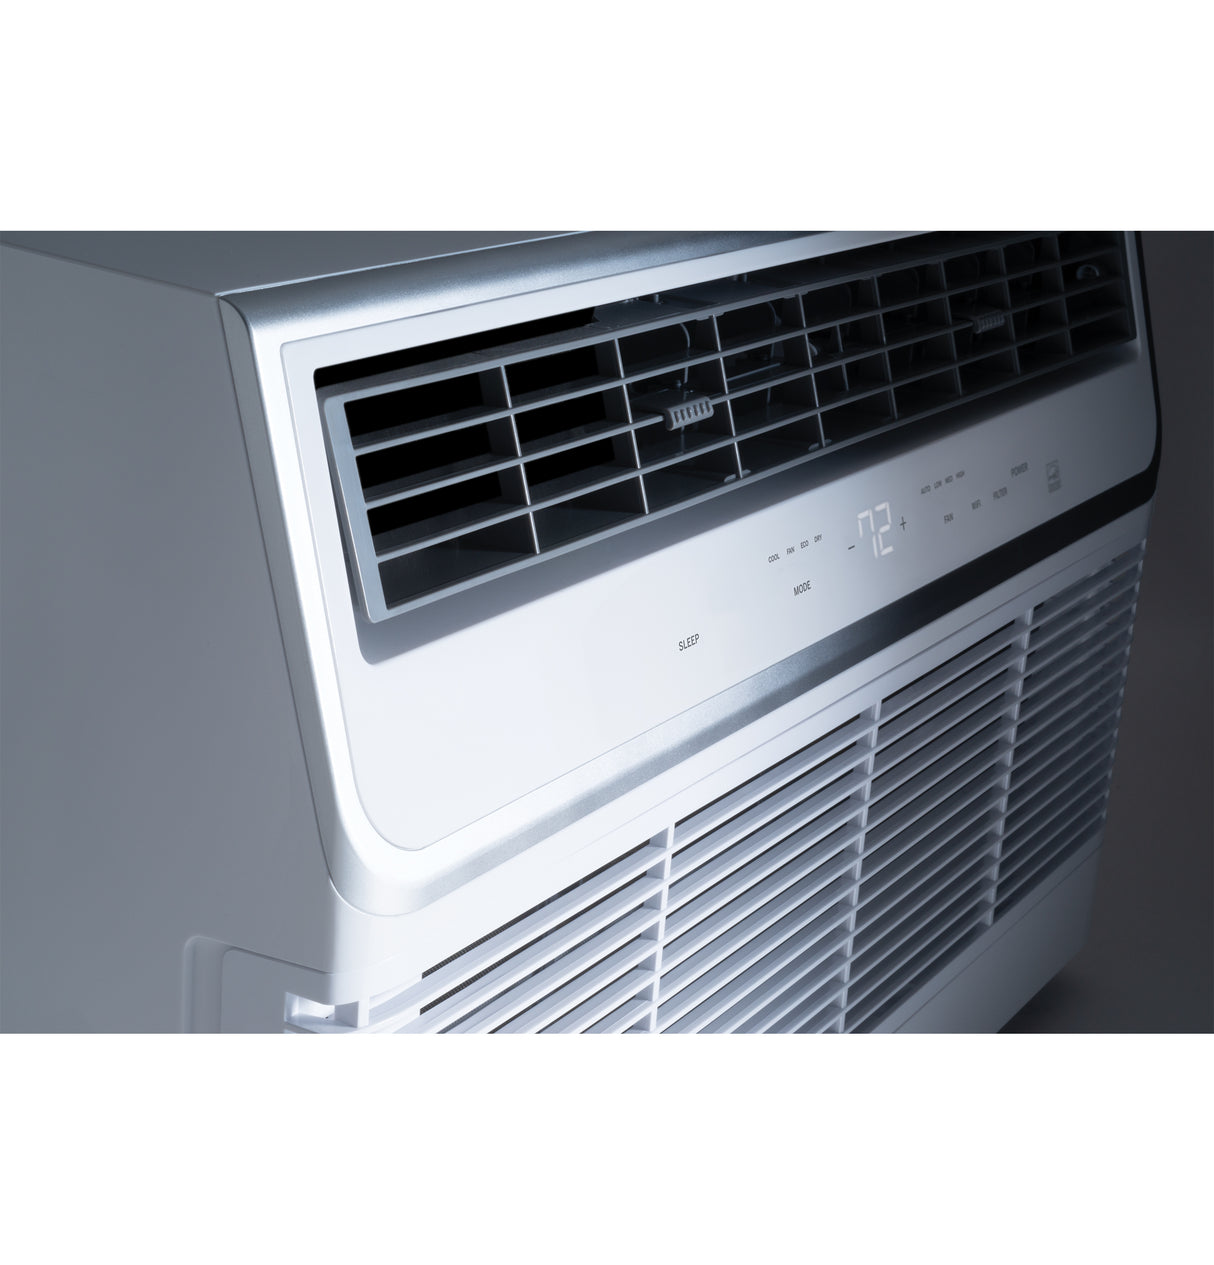 GE(R) ENERGY STAR(R) 115 Volt Built-In Cool-Only Room Air Conditioner - (AJCQ12AWH)